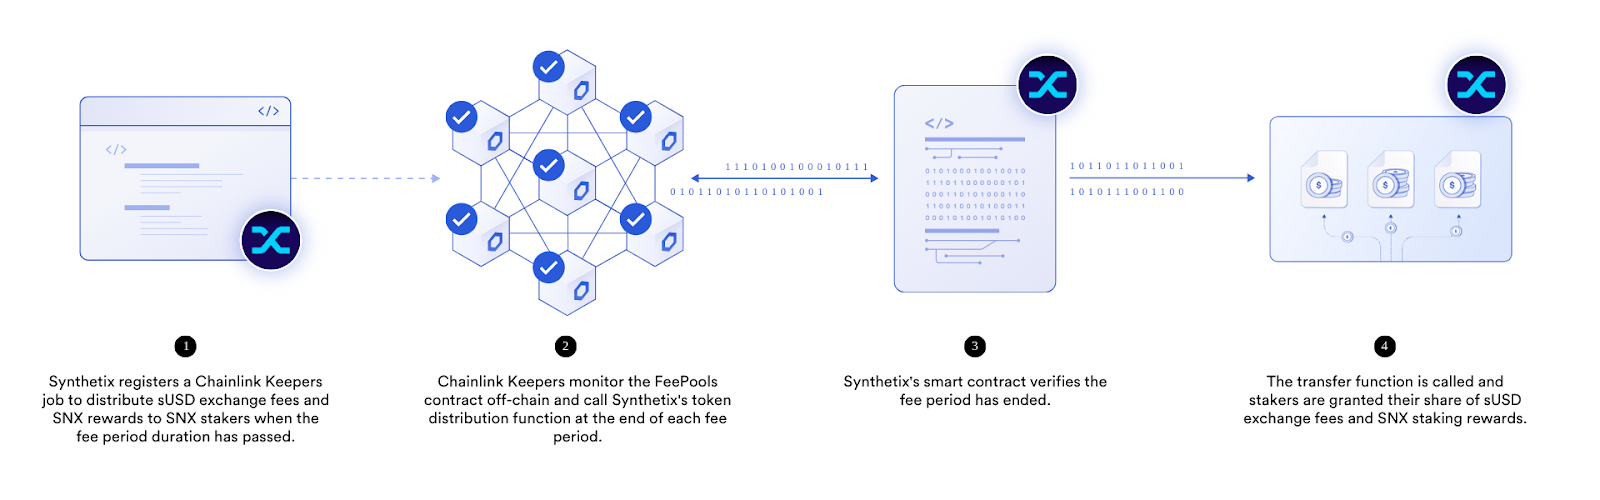 A diagram showing how Synthetix uses Chainlink Keepers to automate fee distribution.